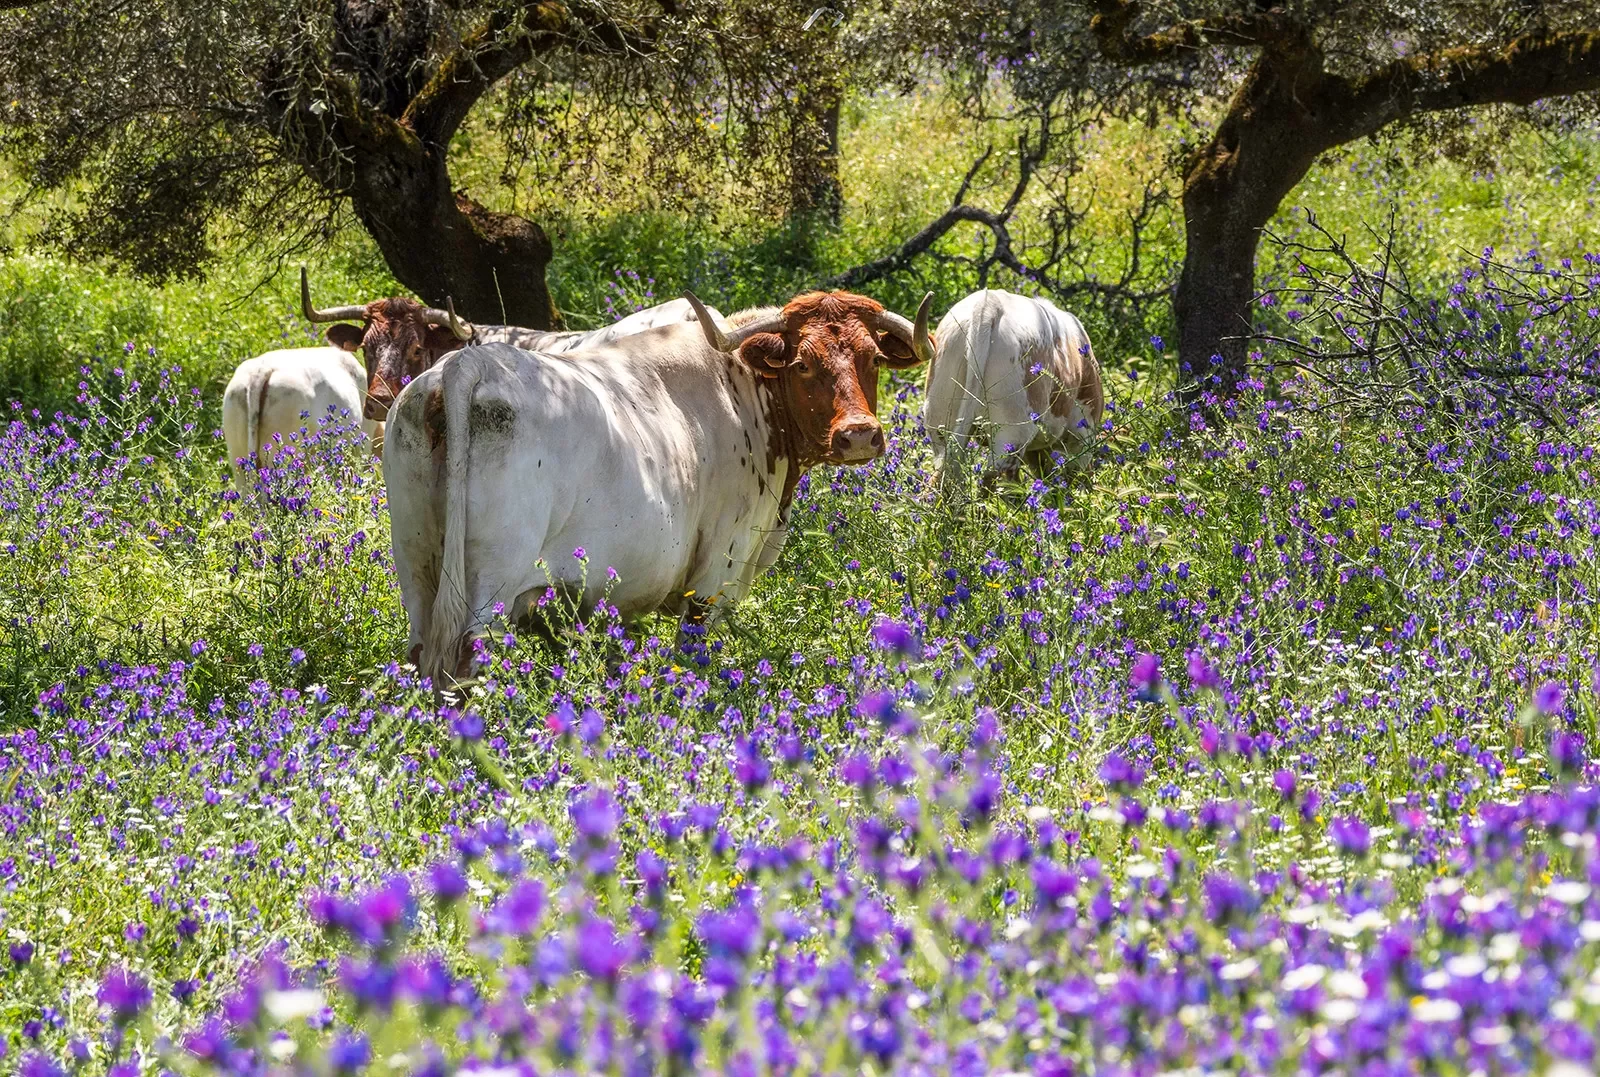 Four cows in a field of purple and green flowers